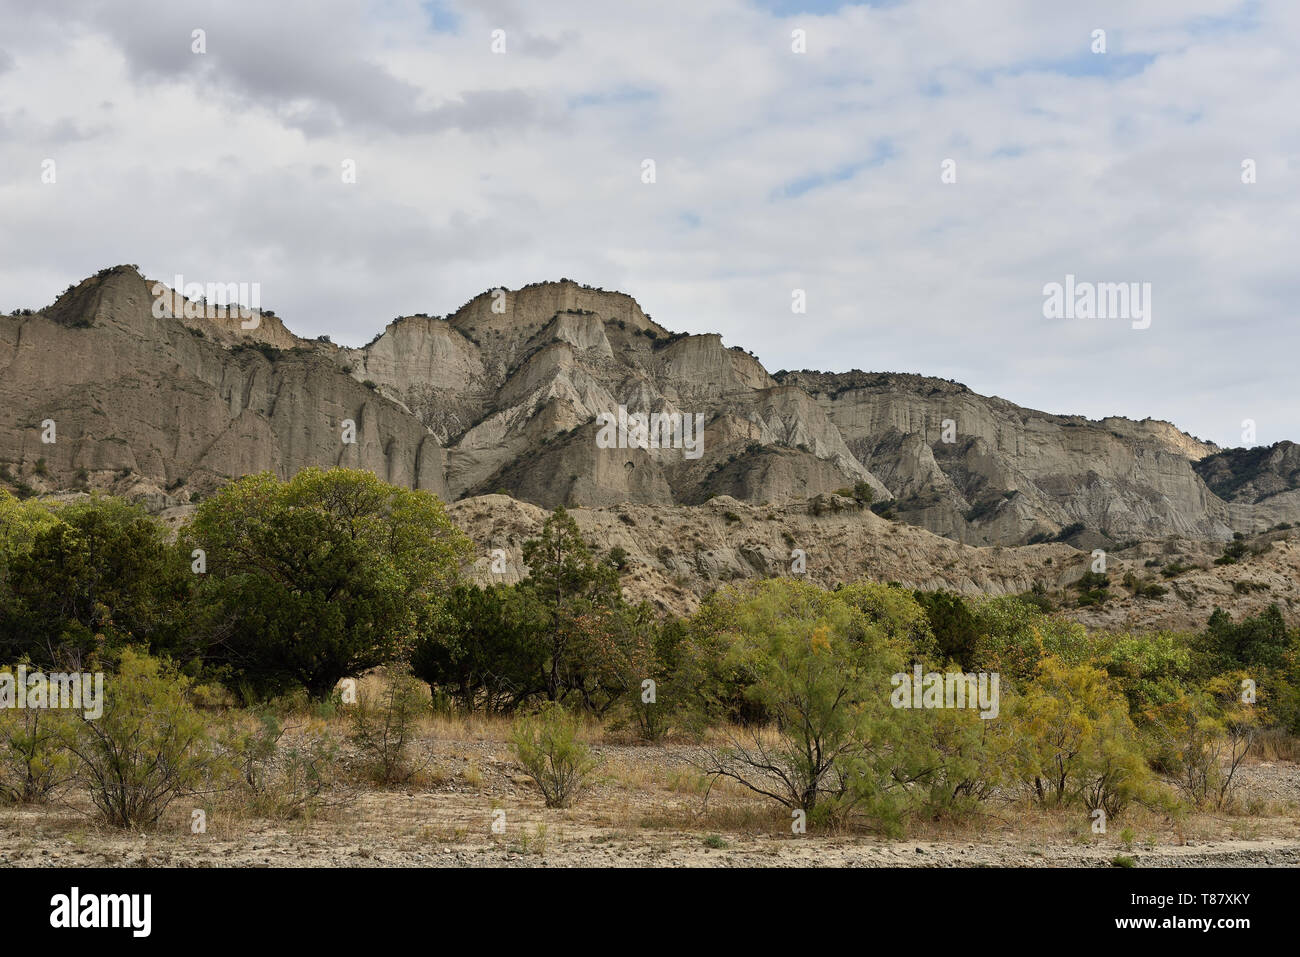 Vashlovani National Park the driest deserts in Georgia. Panoramic view of mountains and canyons in Kakheti – Georgia. Stock Photo